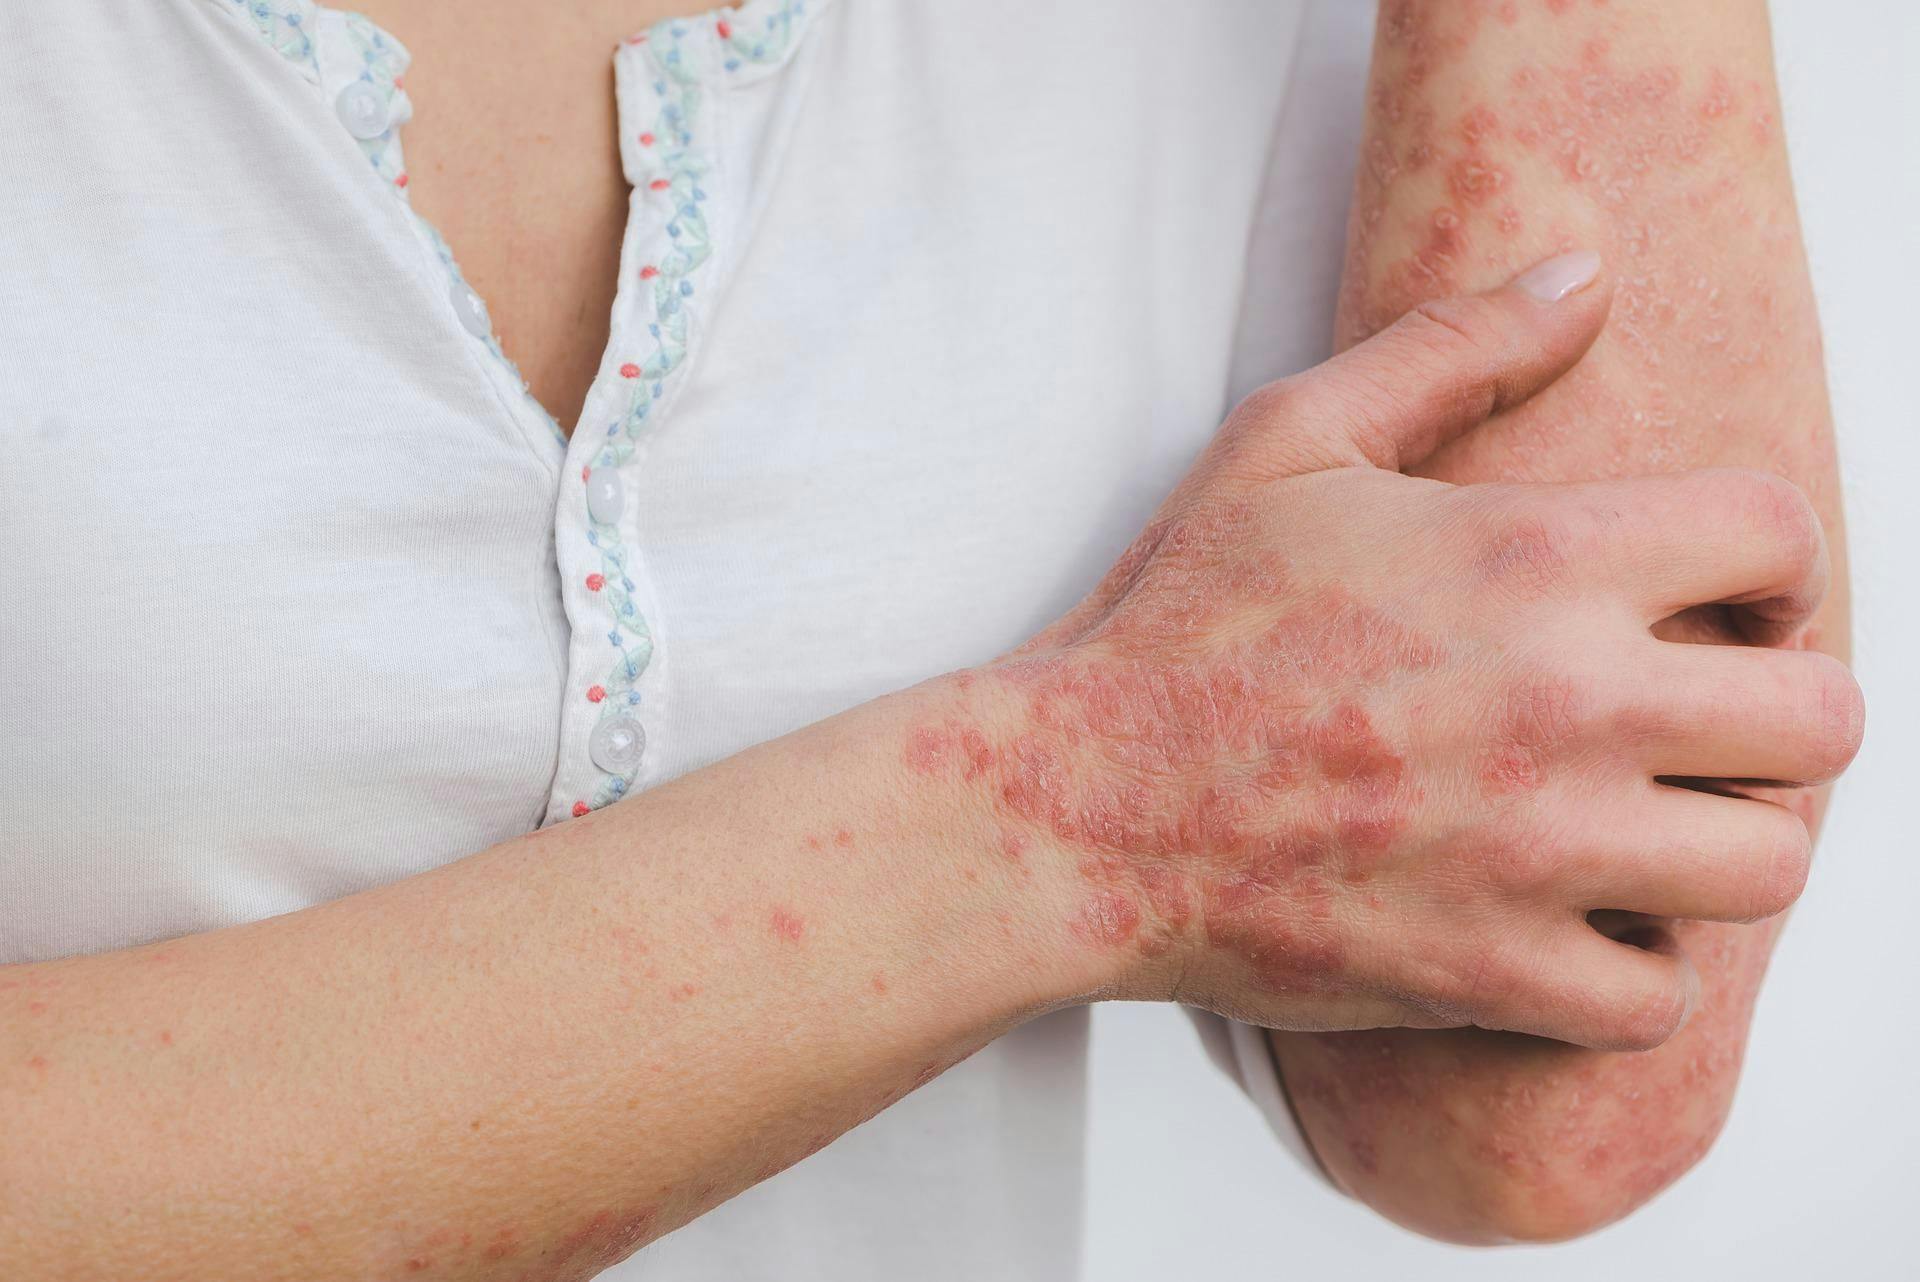 Topical Therapies for Psoriasis to Look Forward To  